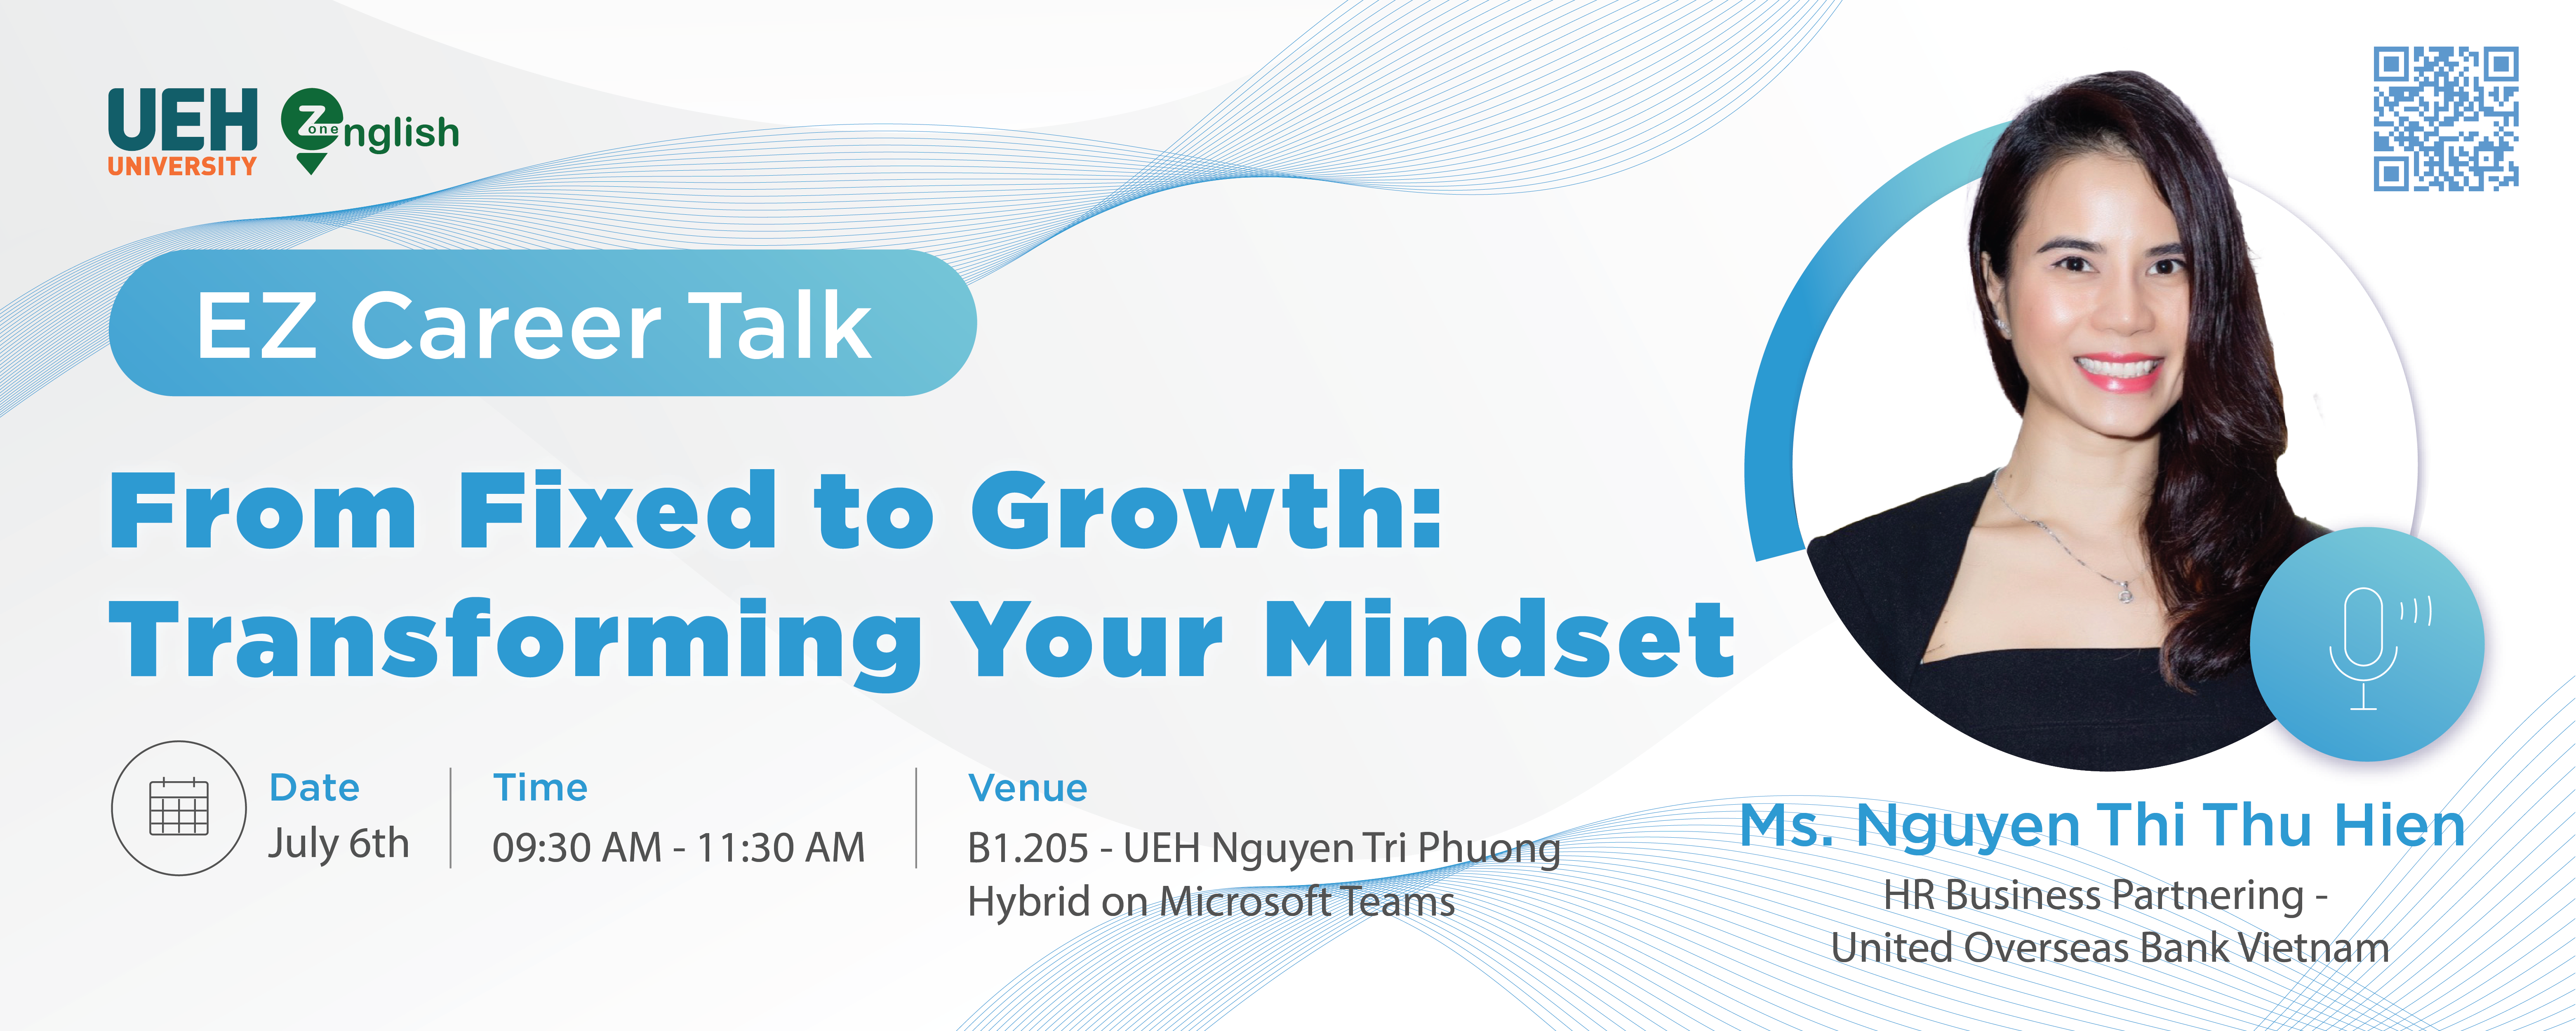 EZ Career Talk: "From Fixed to Growth: Transforming Your Mindset"